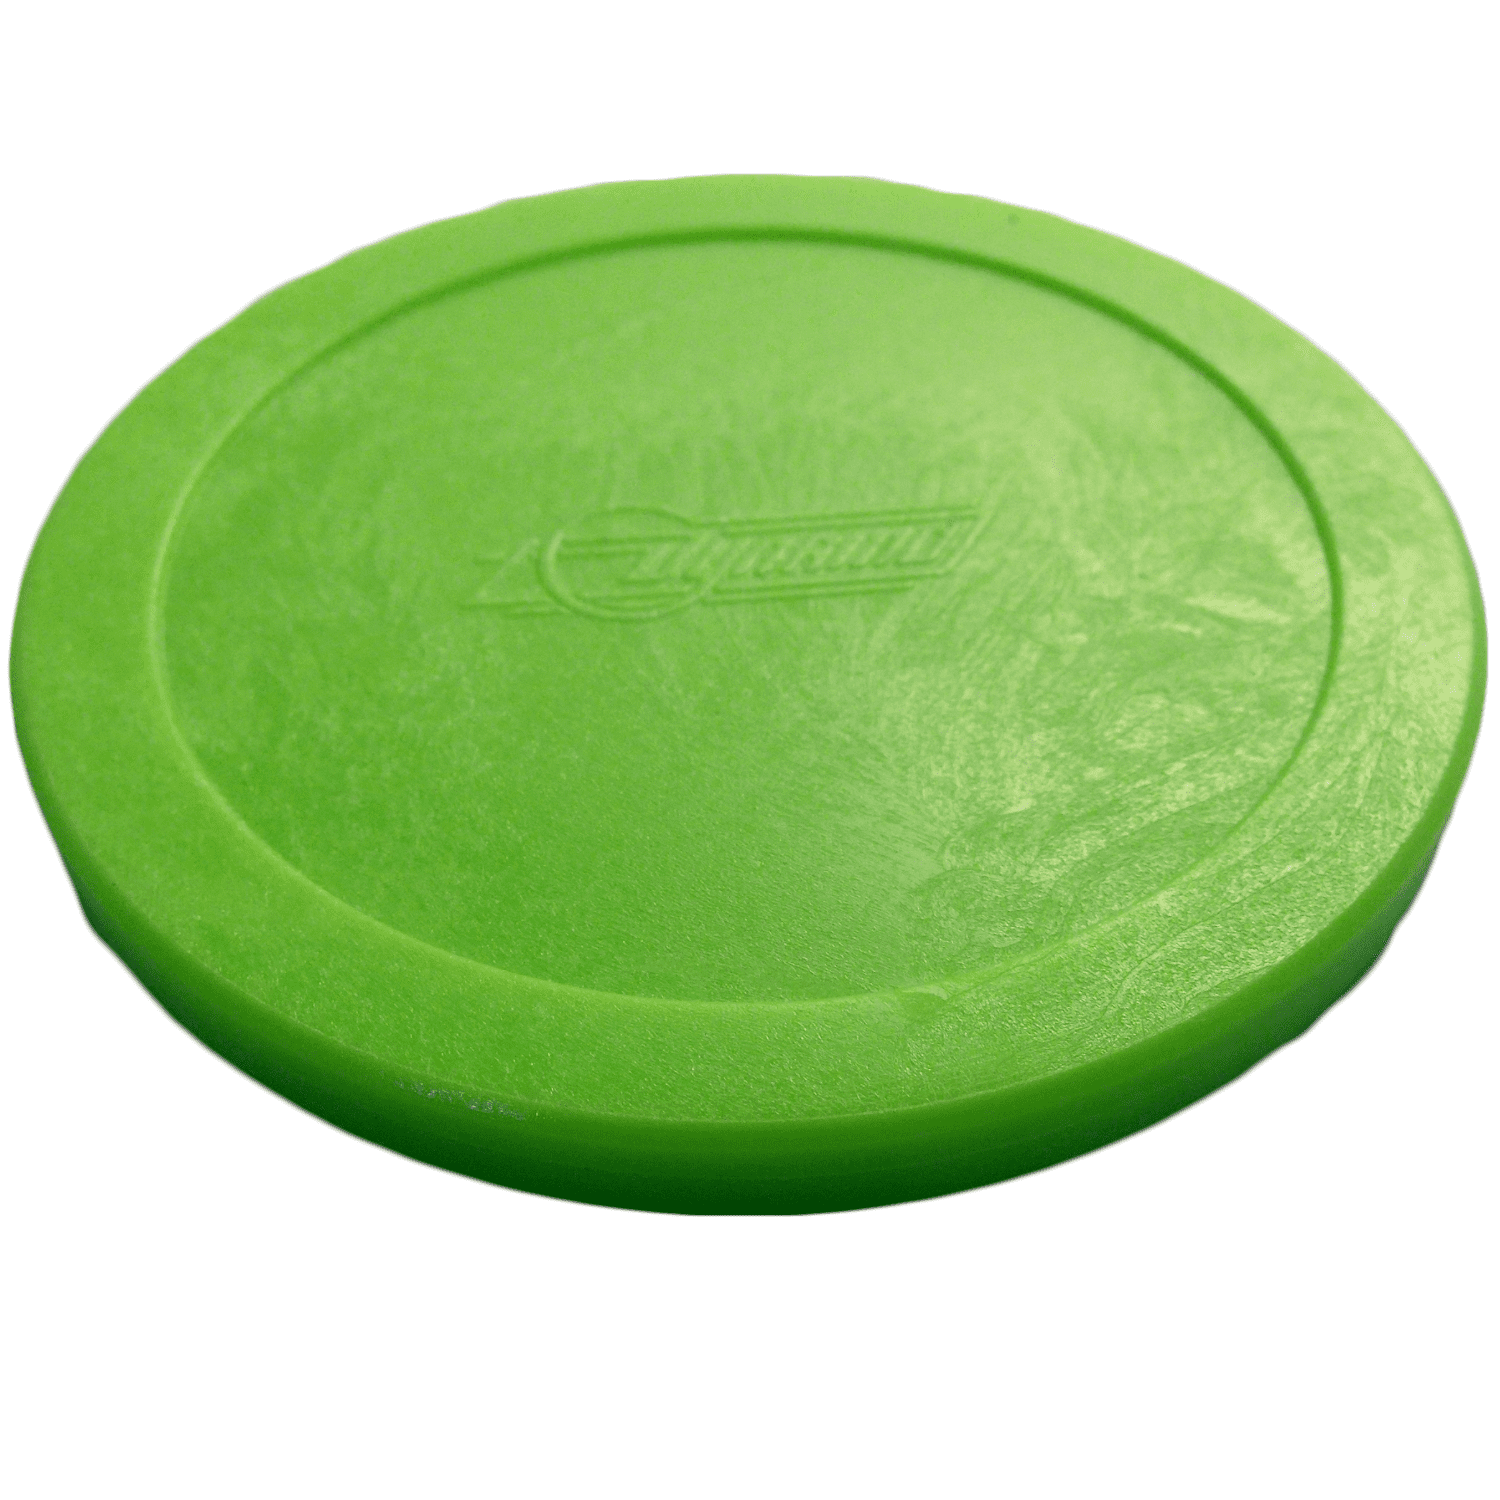 Valley/Dynamo Large 3 1/4 Inch Air Hockey Pucks Set of 2 Green & Quiet White 